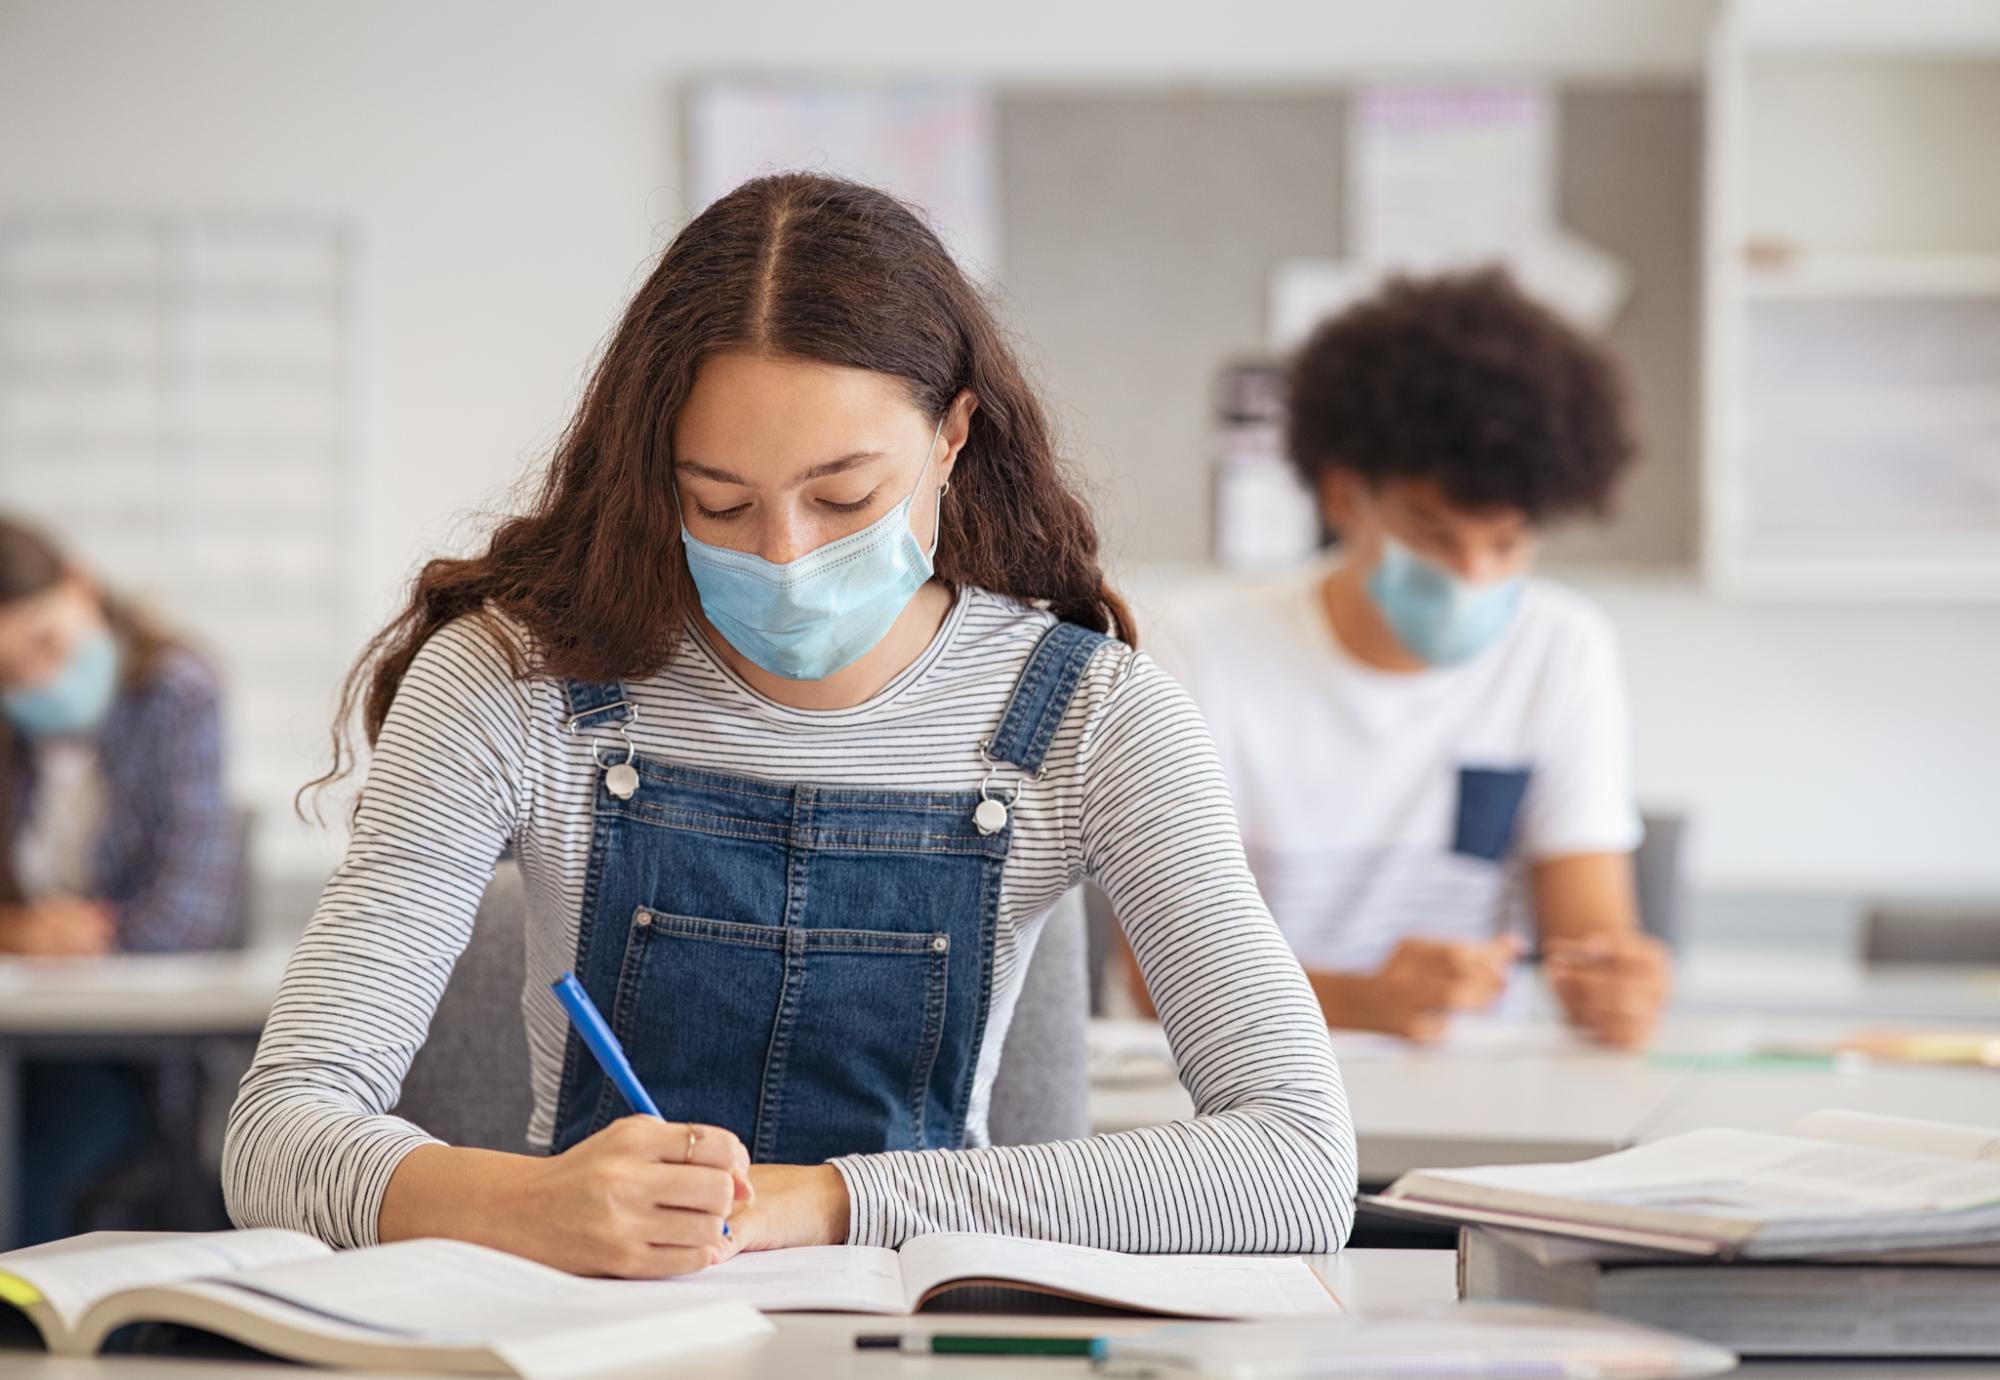 High school or college age girl in mask working at her desk